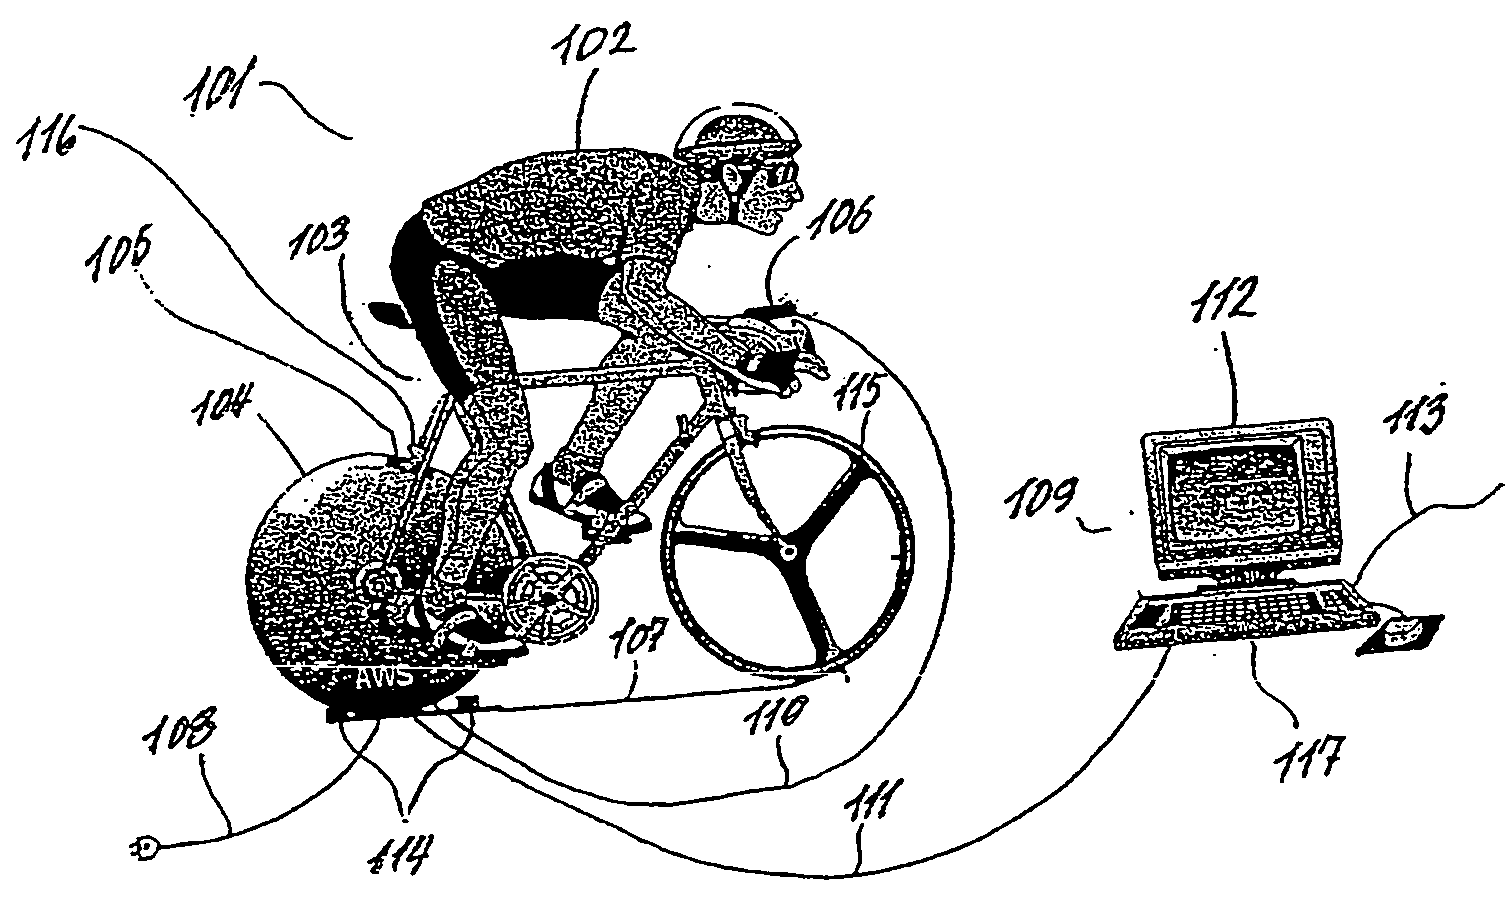 Apparatus for training on a bicycle connected to the apparatus